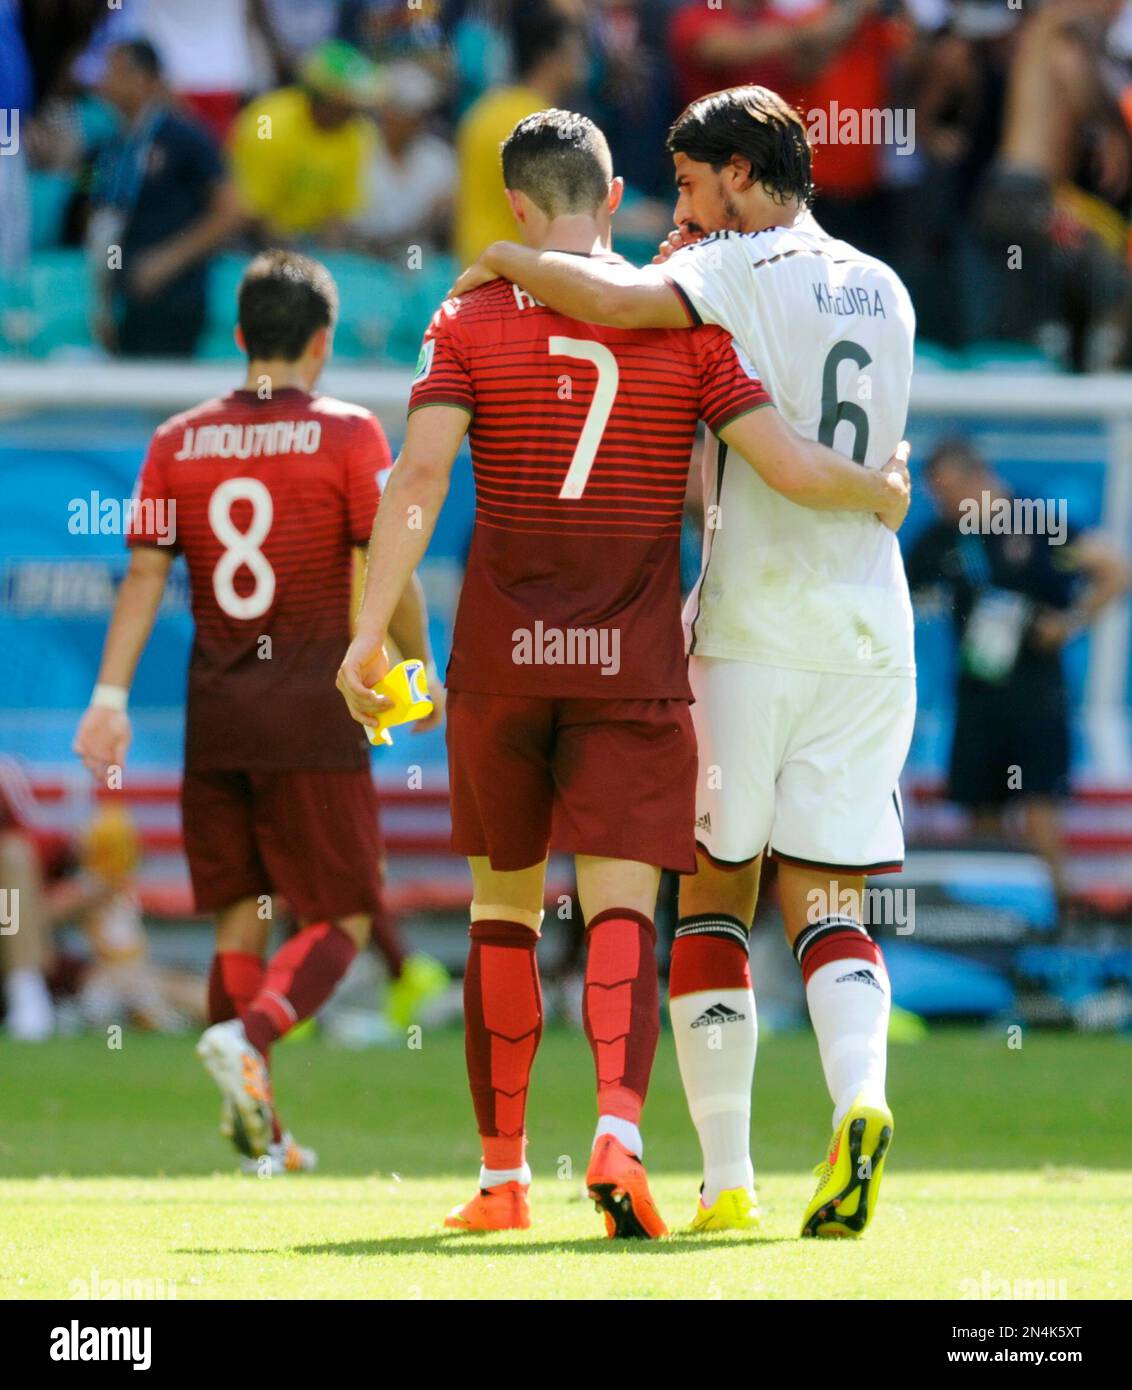 Portugal's Cristiano Ronaldo (7) walks off the pitch with Germany's Sami  Khedira (6) at the half during the group G World Cup soccer match between  Germany and Portugal at the Arena Fonte